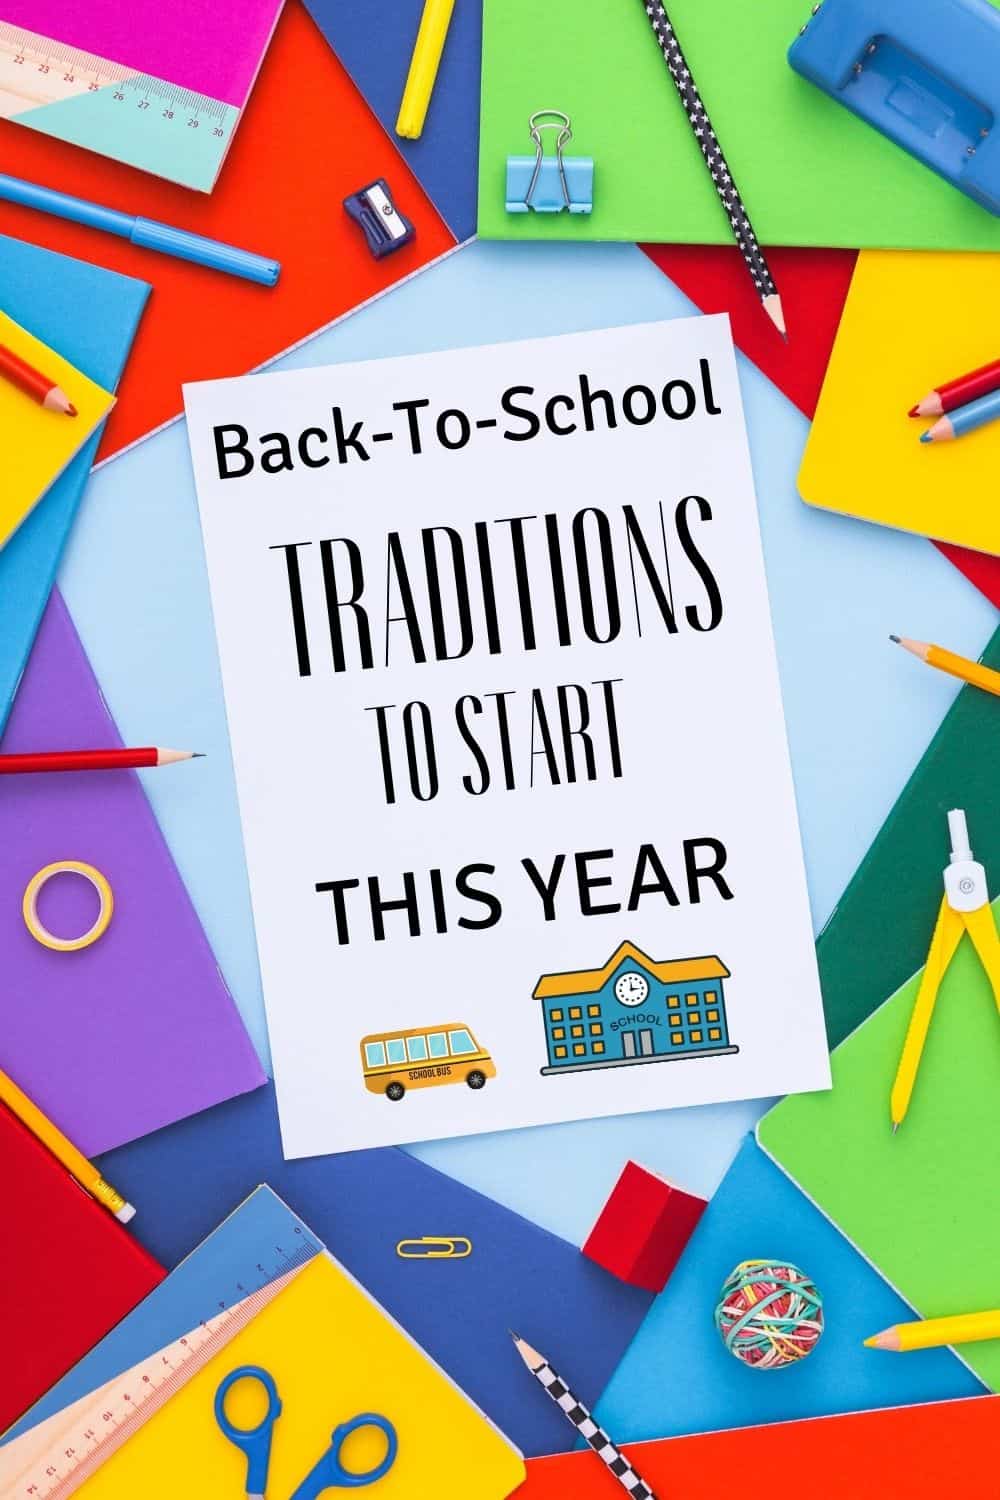 Making your kid's first day of school super special does not have to be difficult or stressful! Read these 12 traditions you can start this year to make your child's back to school one to remember!